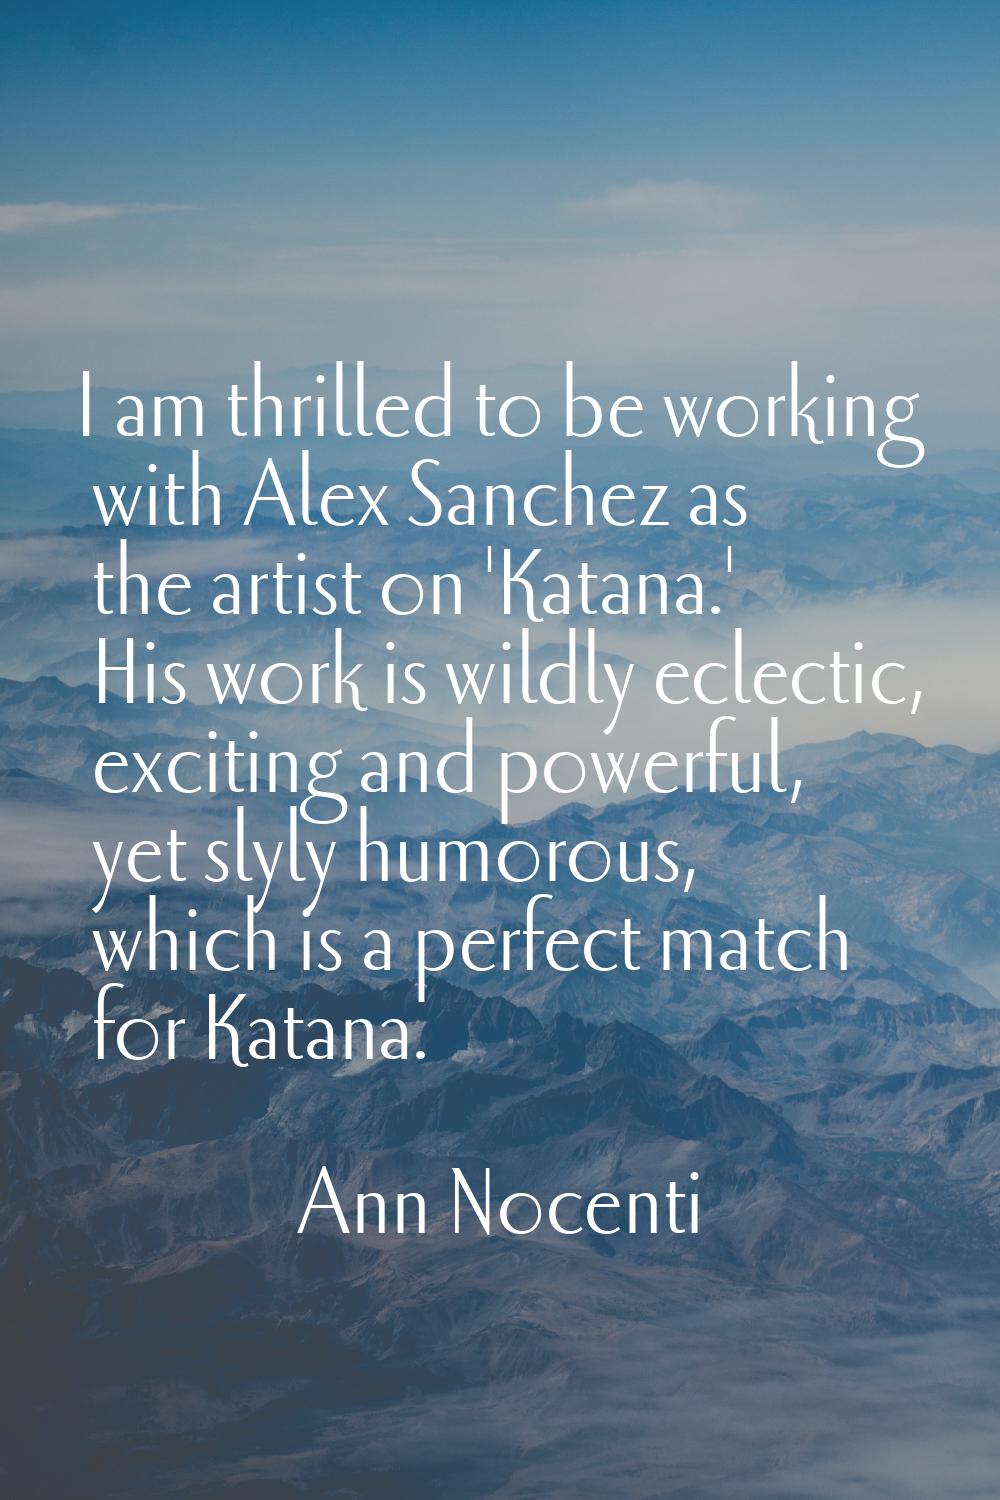 I am thrilled to be working with Alex Sanchez as the artist on 'Katana.' His work is wildly eclecti